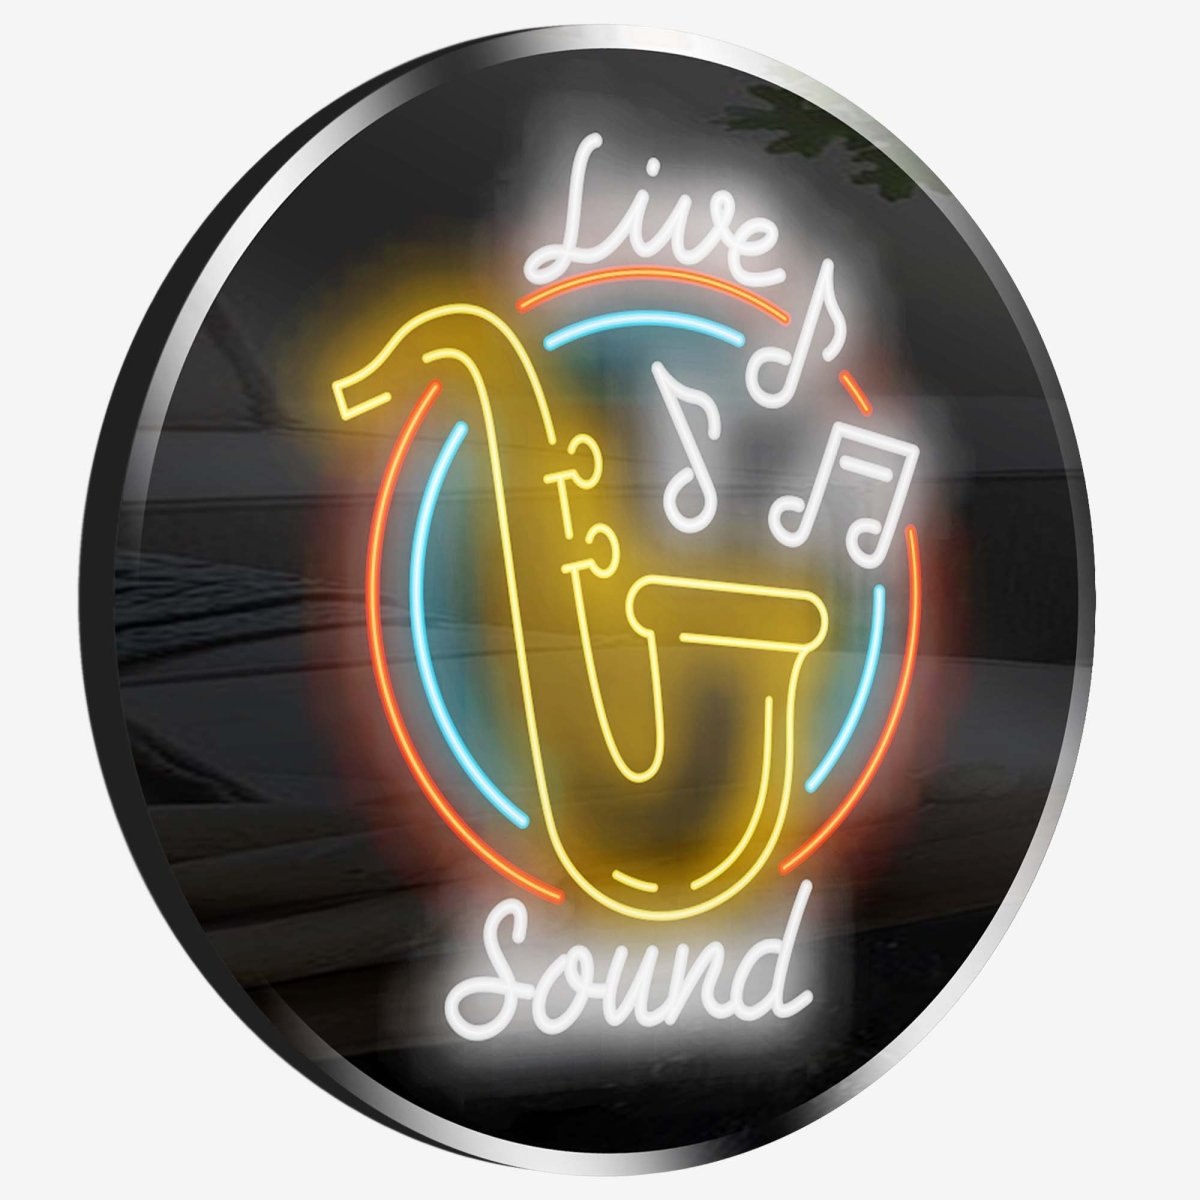 Personalized Neon Sign Live Sound Saxophone - madaboutneon